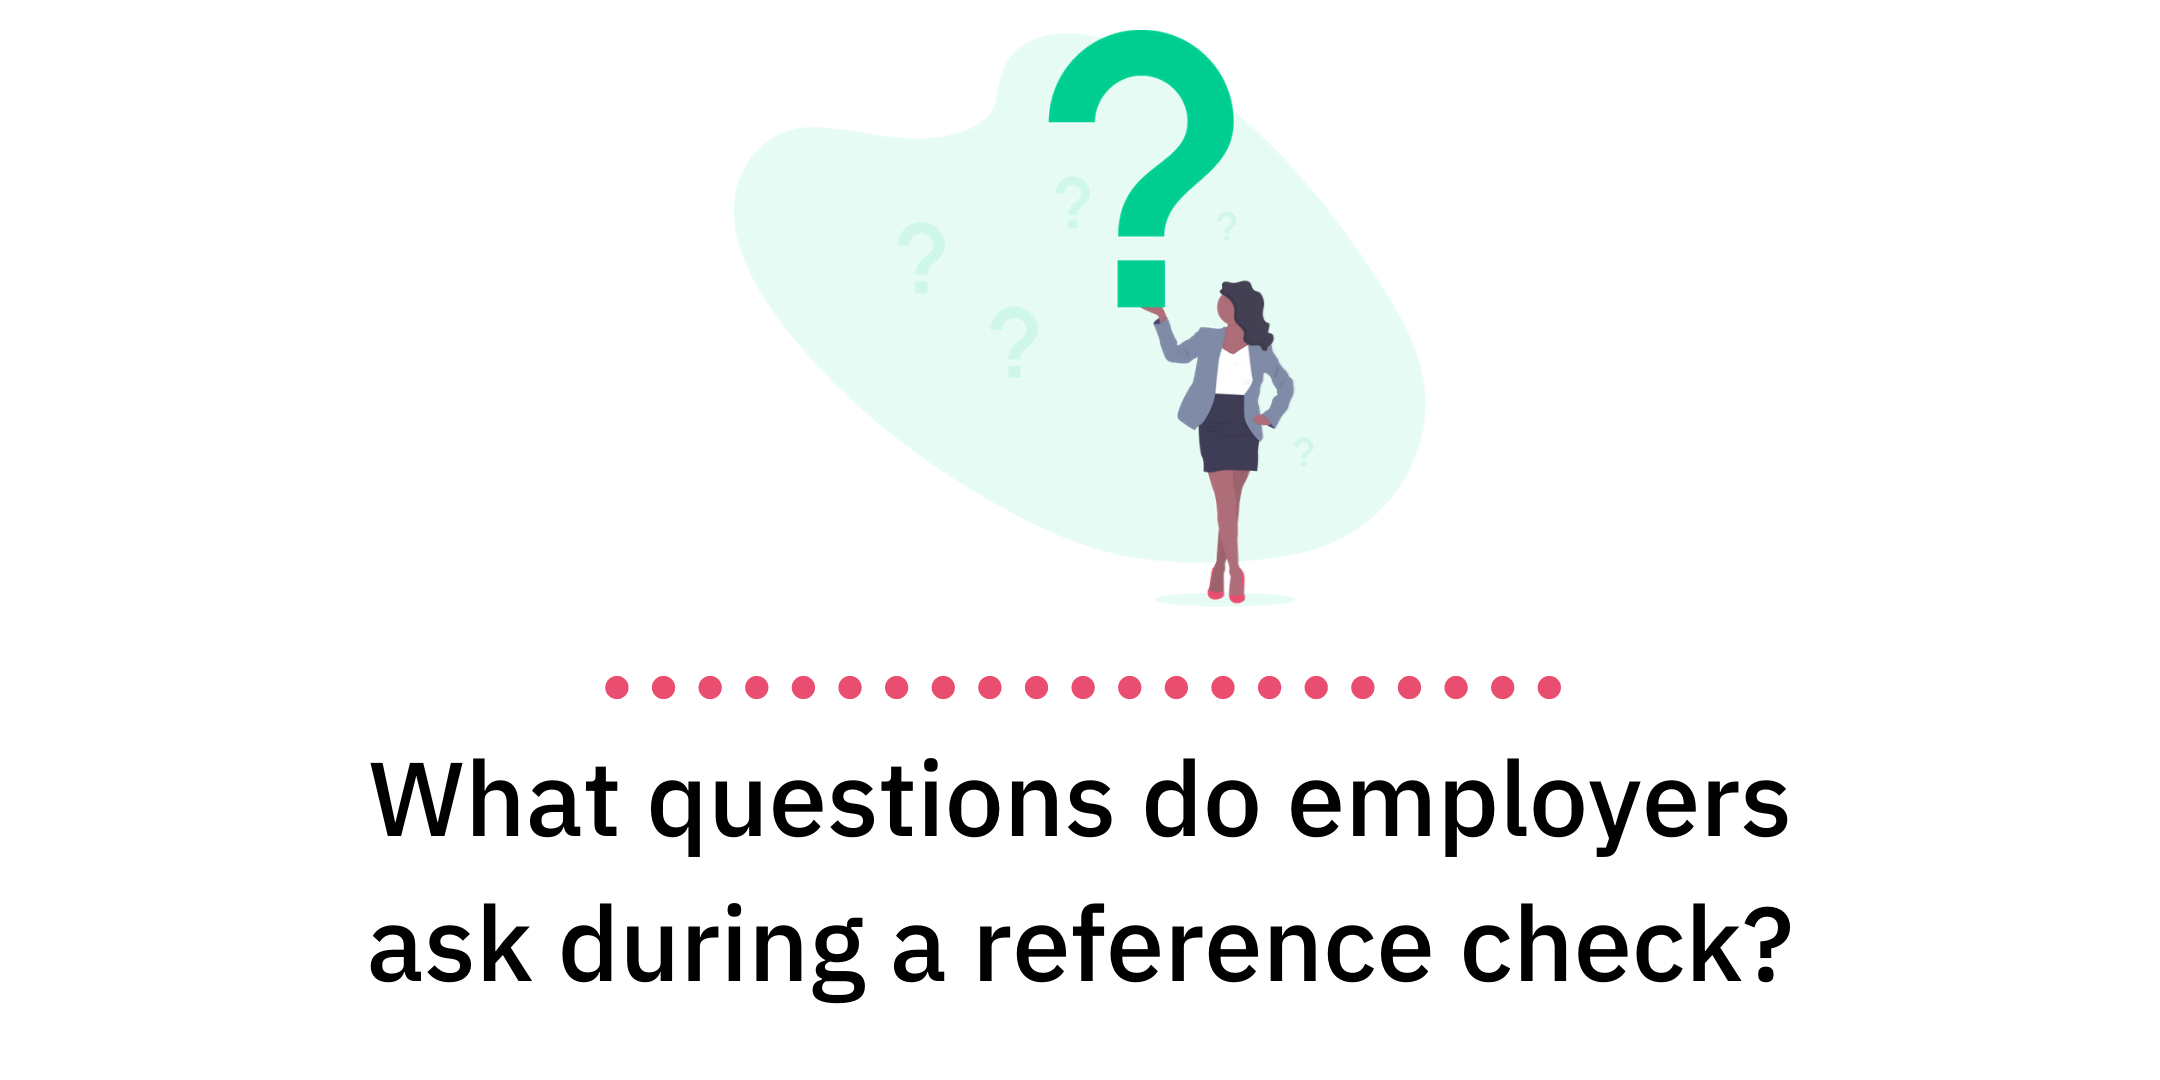 What Questions Do Employers Ask During a Reference Check?